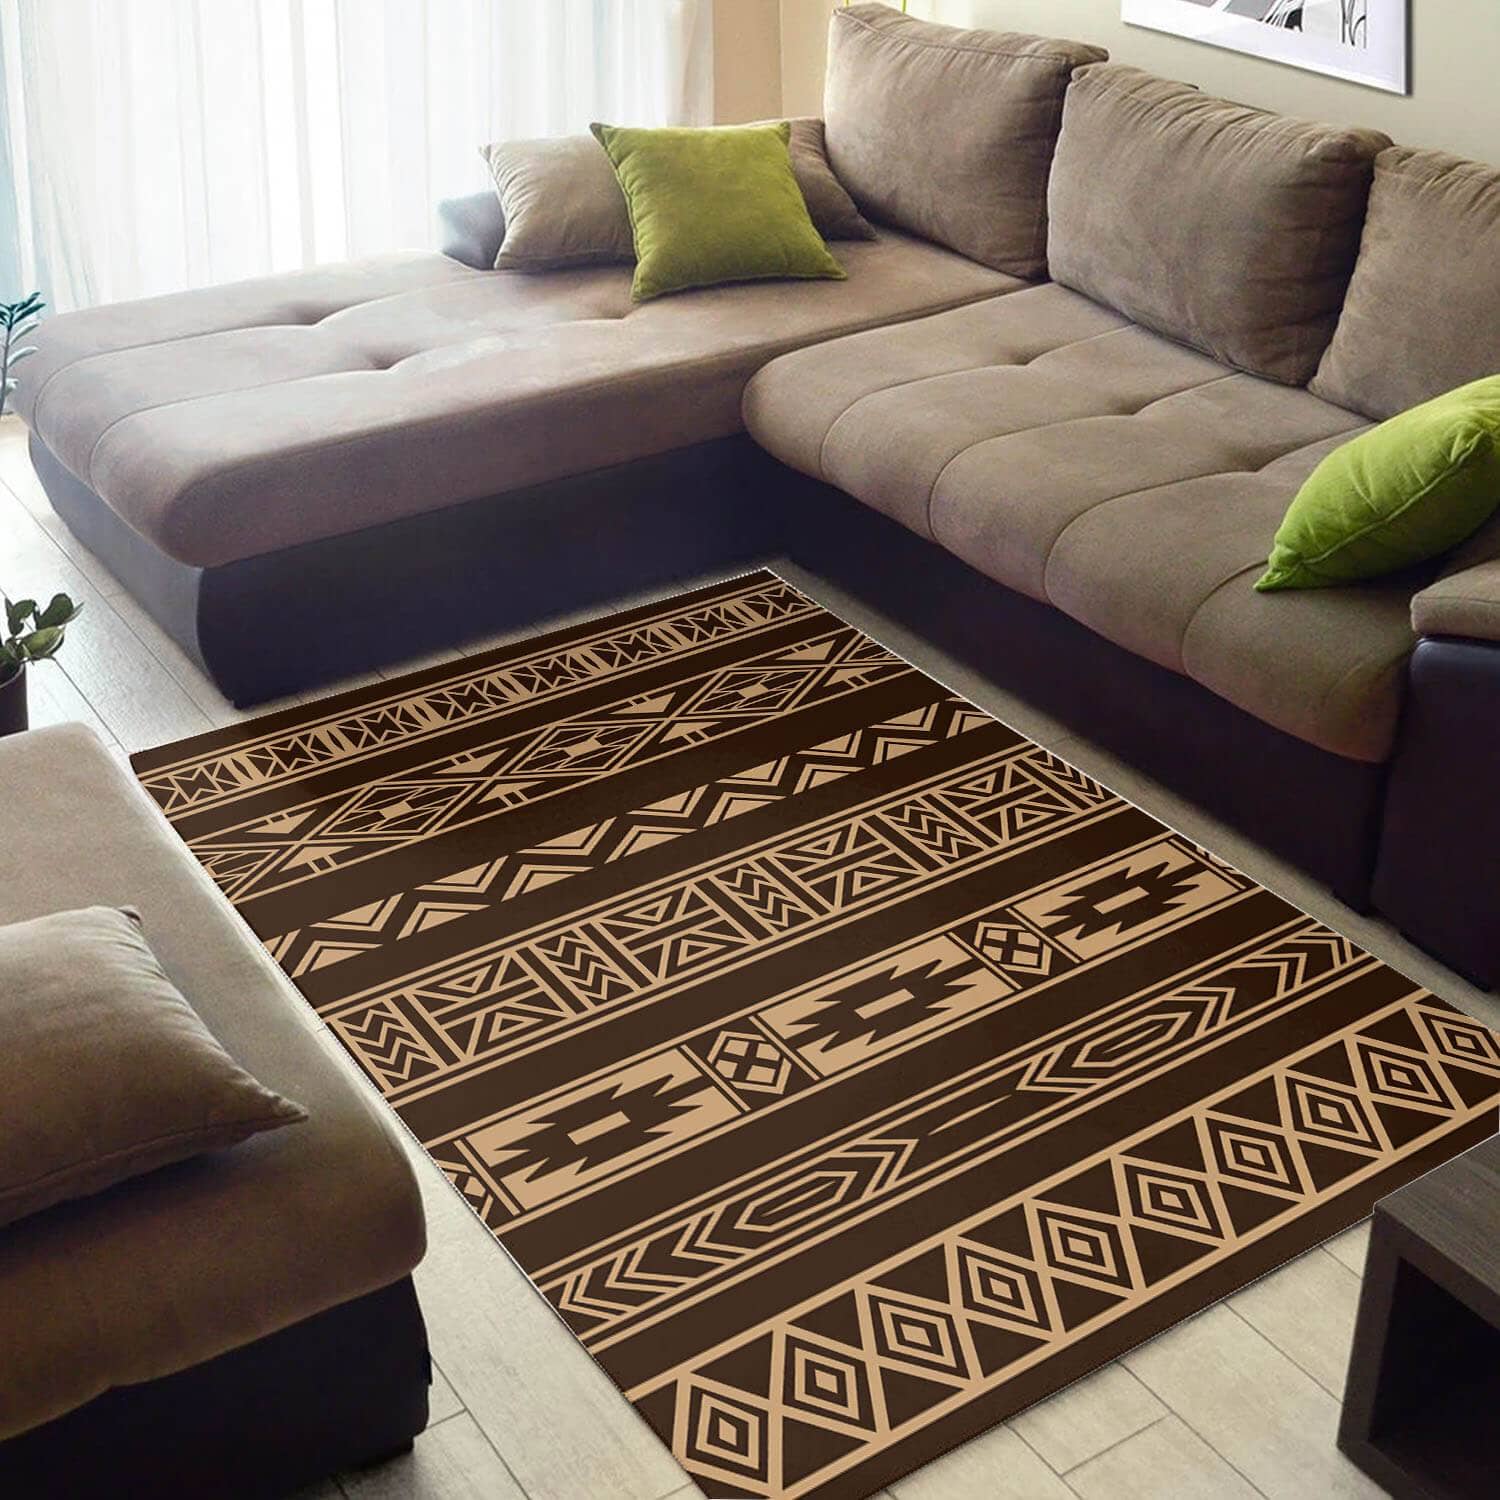 Inspired African Style Amazing Afrocentric Pattern Art Themed House Rug